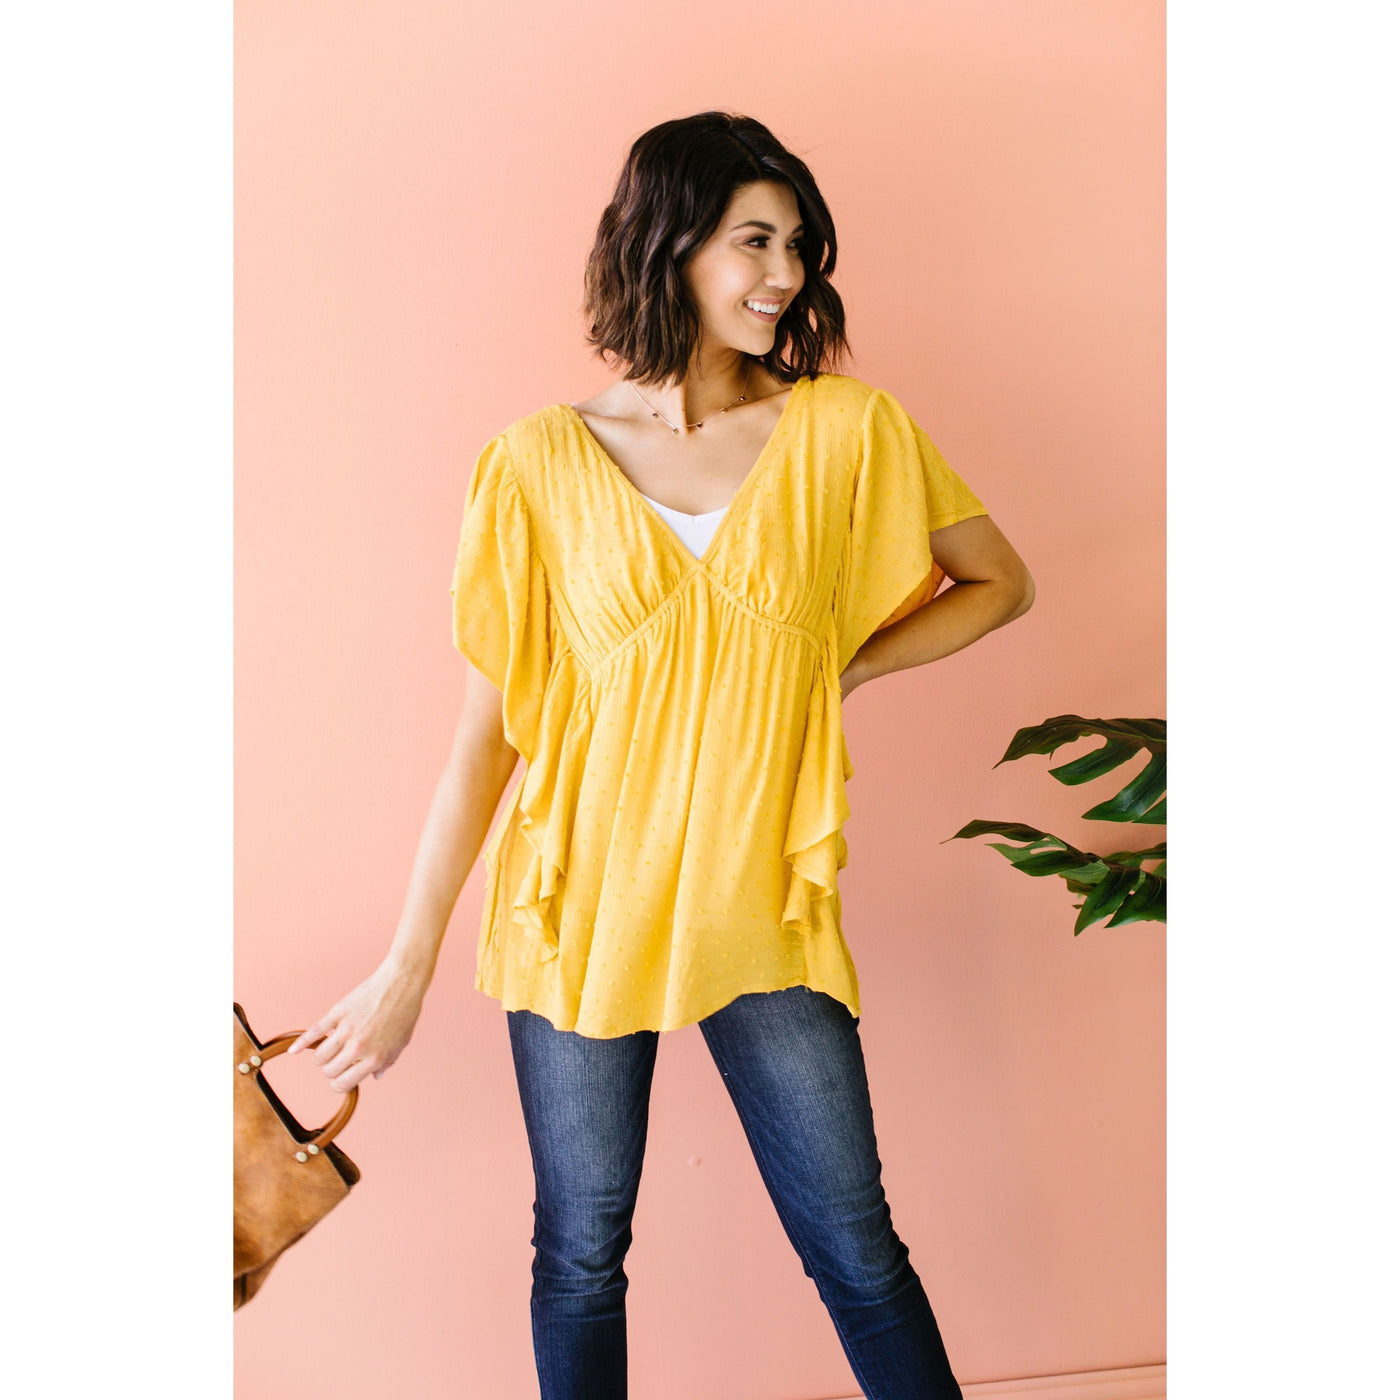 Fly Away Home Blouse In Honey-W Top-Graceful & Chic Boutique, Family Clothing Store in Waxahachie, Texas